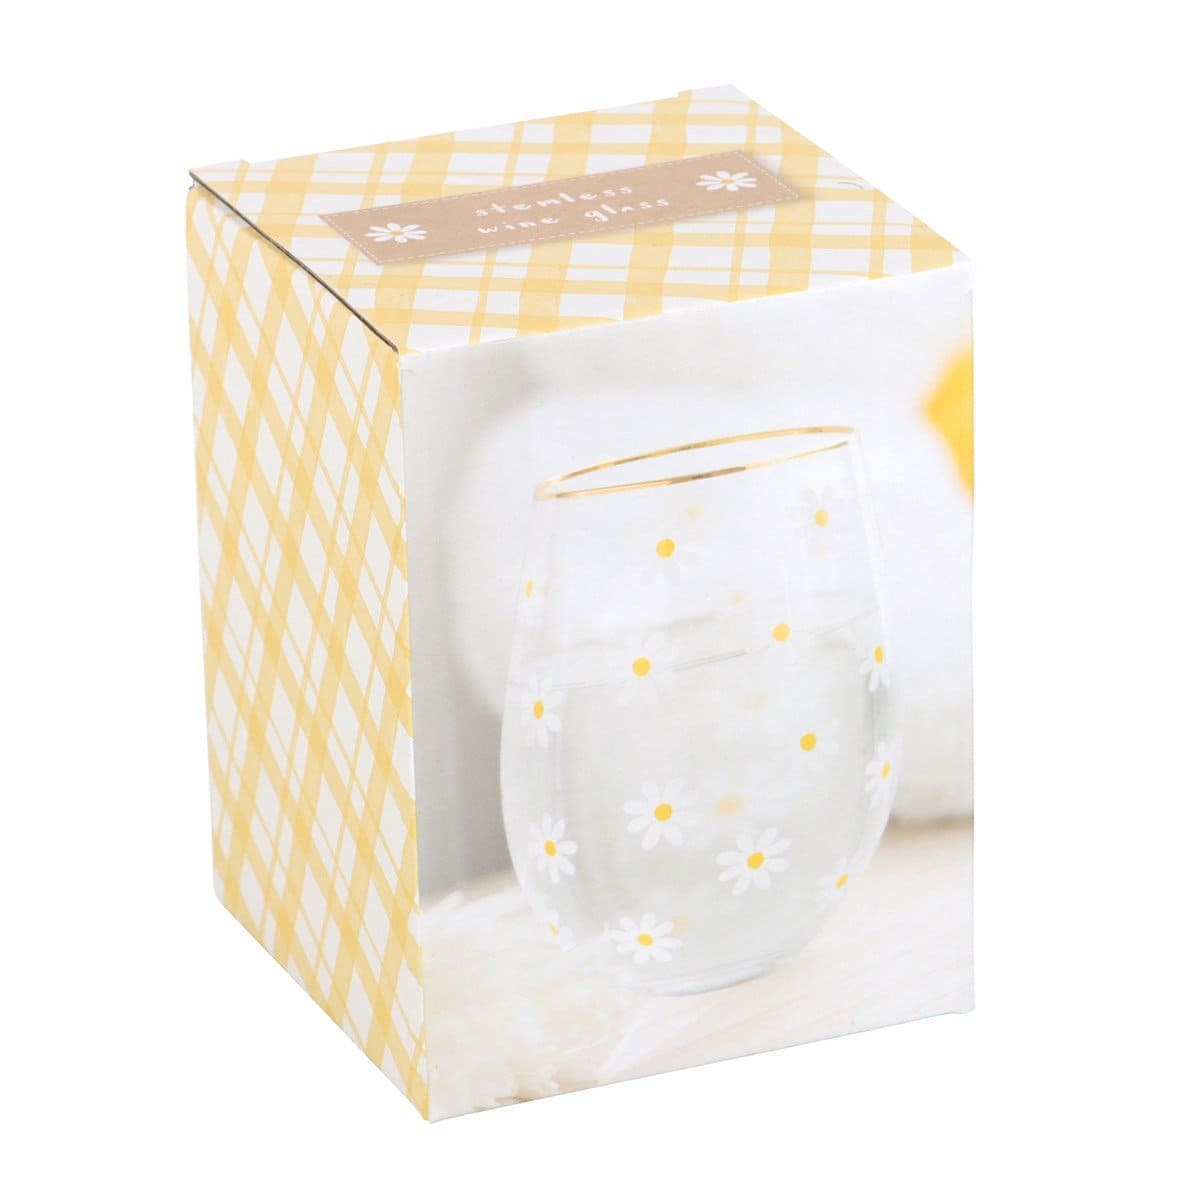 Daisy Print Stemless Wine Glass With Gold-Tone Rim - Stemless Wine Glass by Jones Home & Gifts